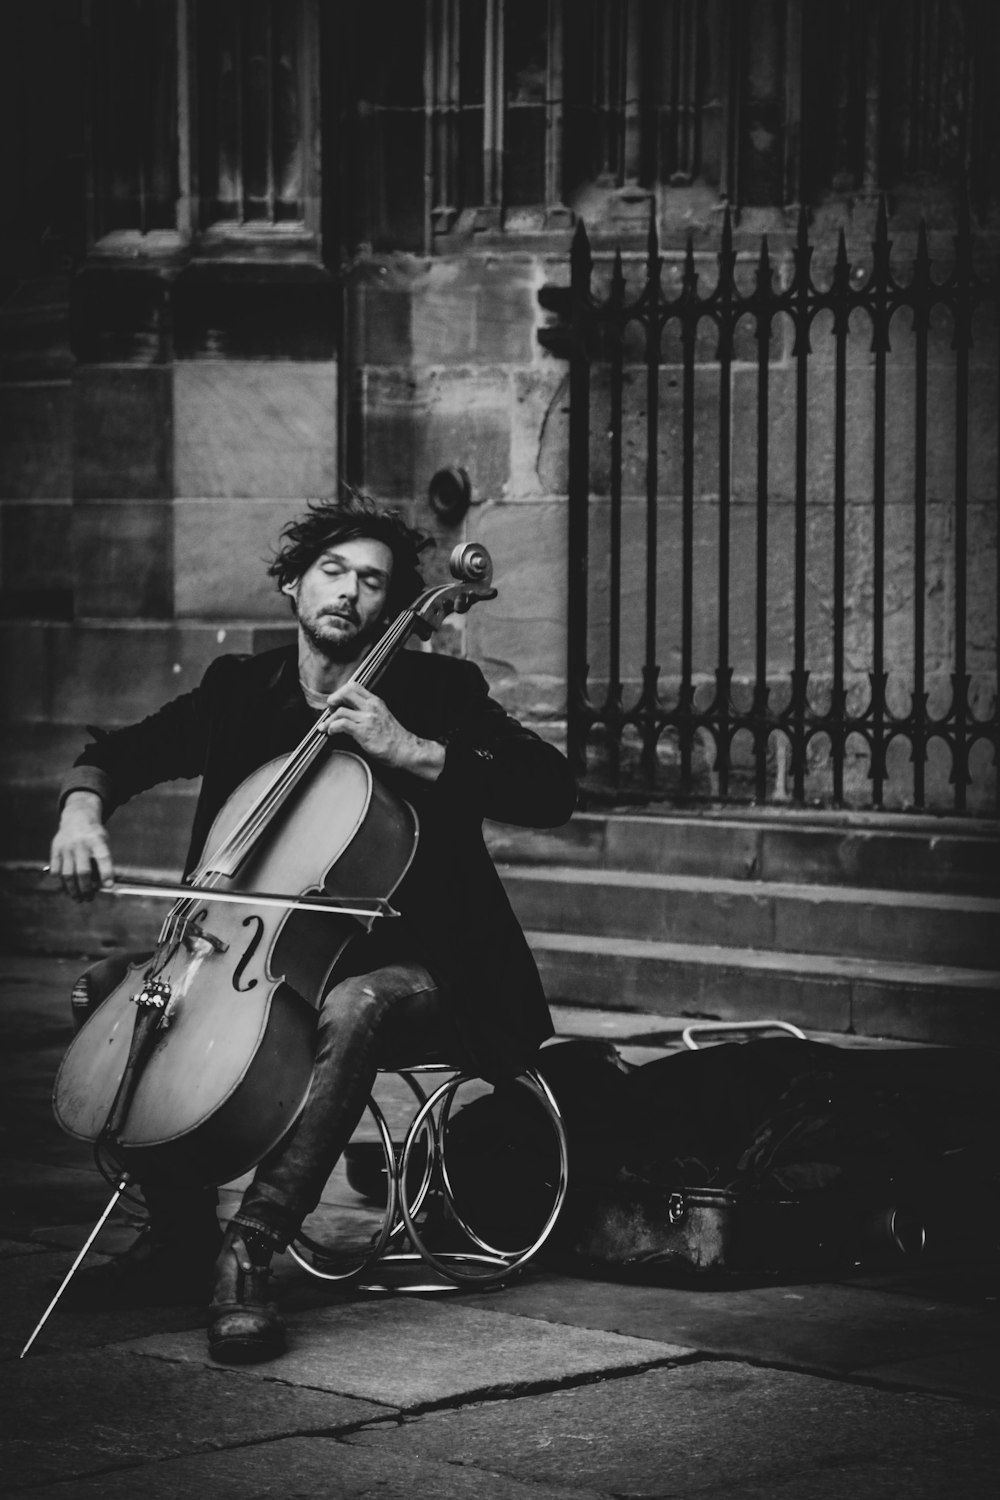 man playing violin on street in grayscale photography